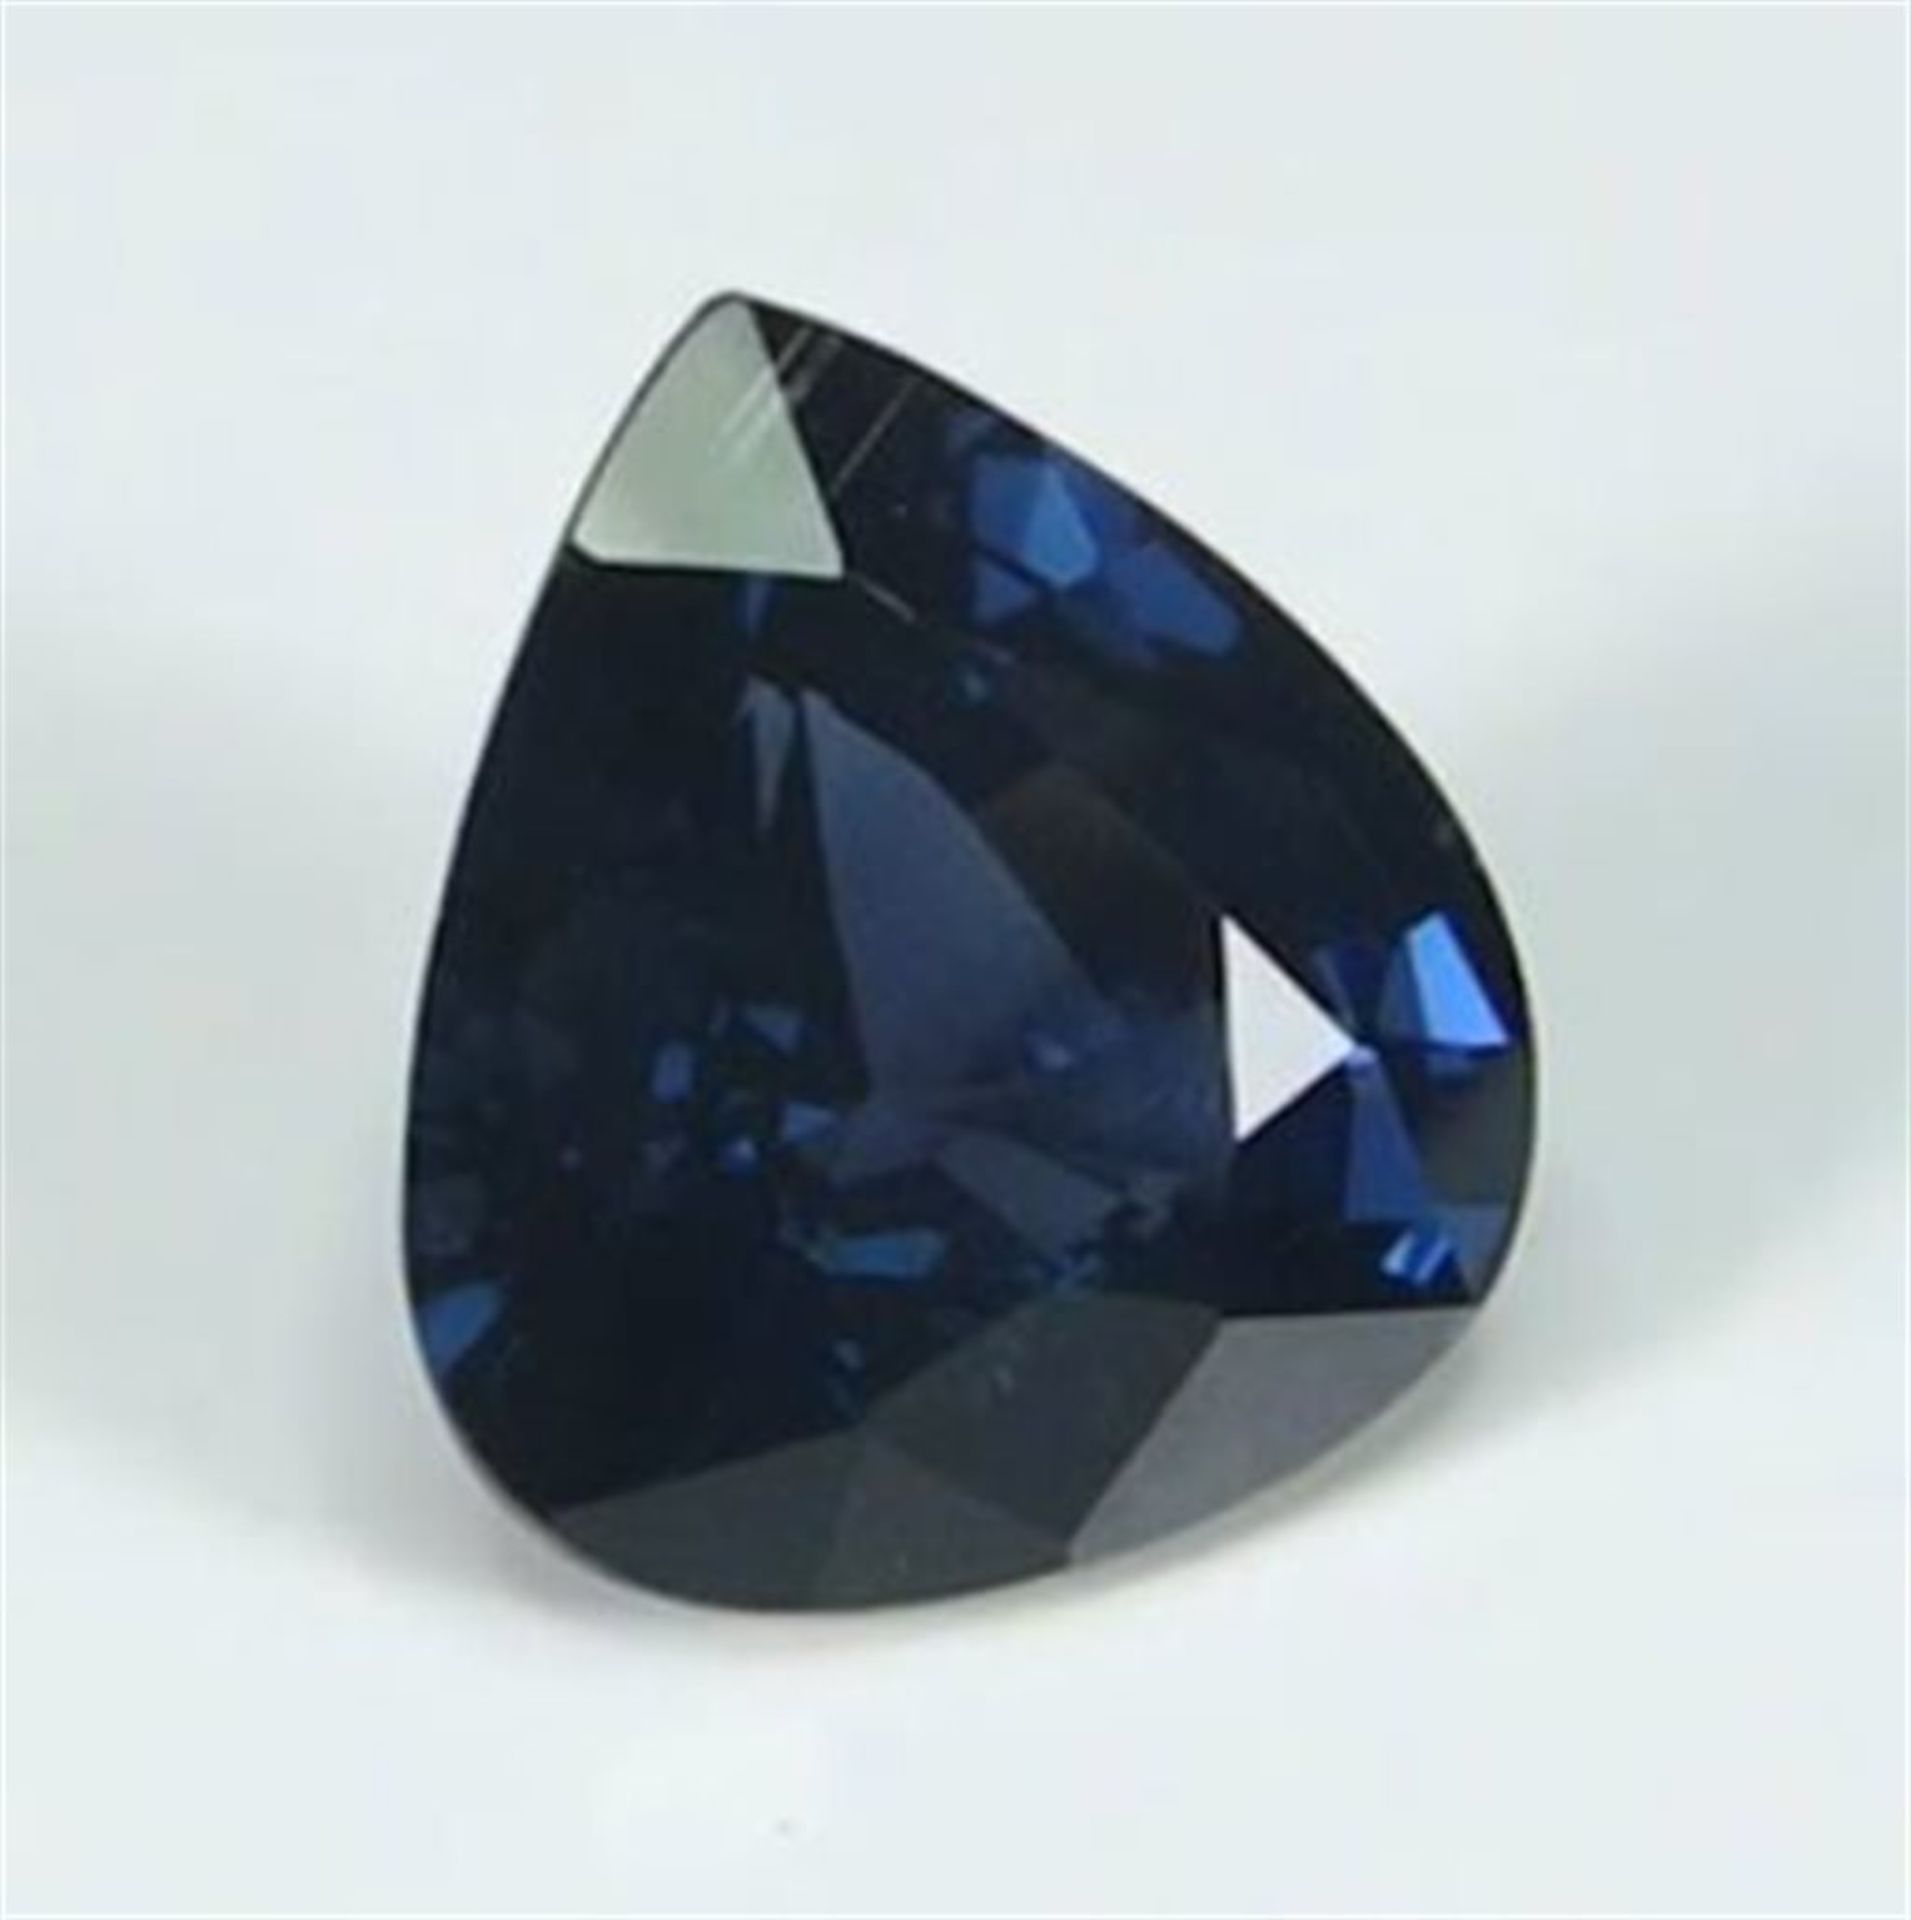 GIA Certified 3.35 ct. Dark Blue Spinel - Image 9 of 10